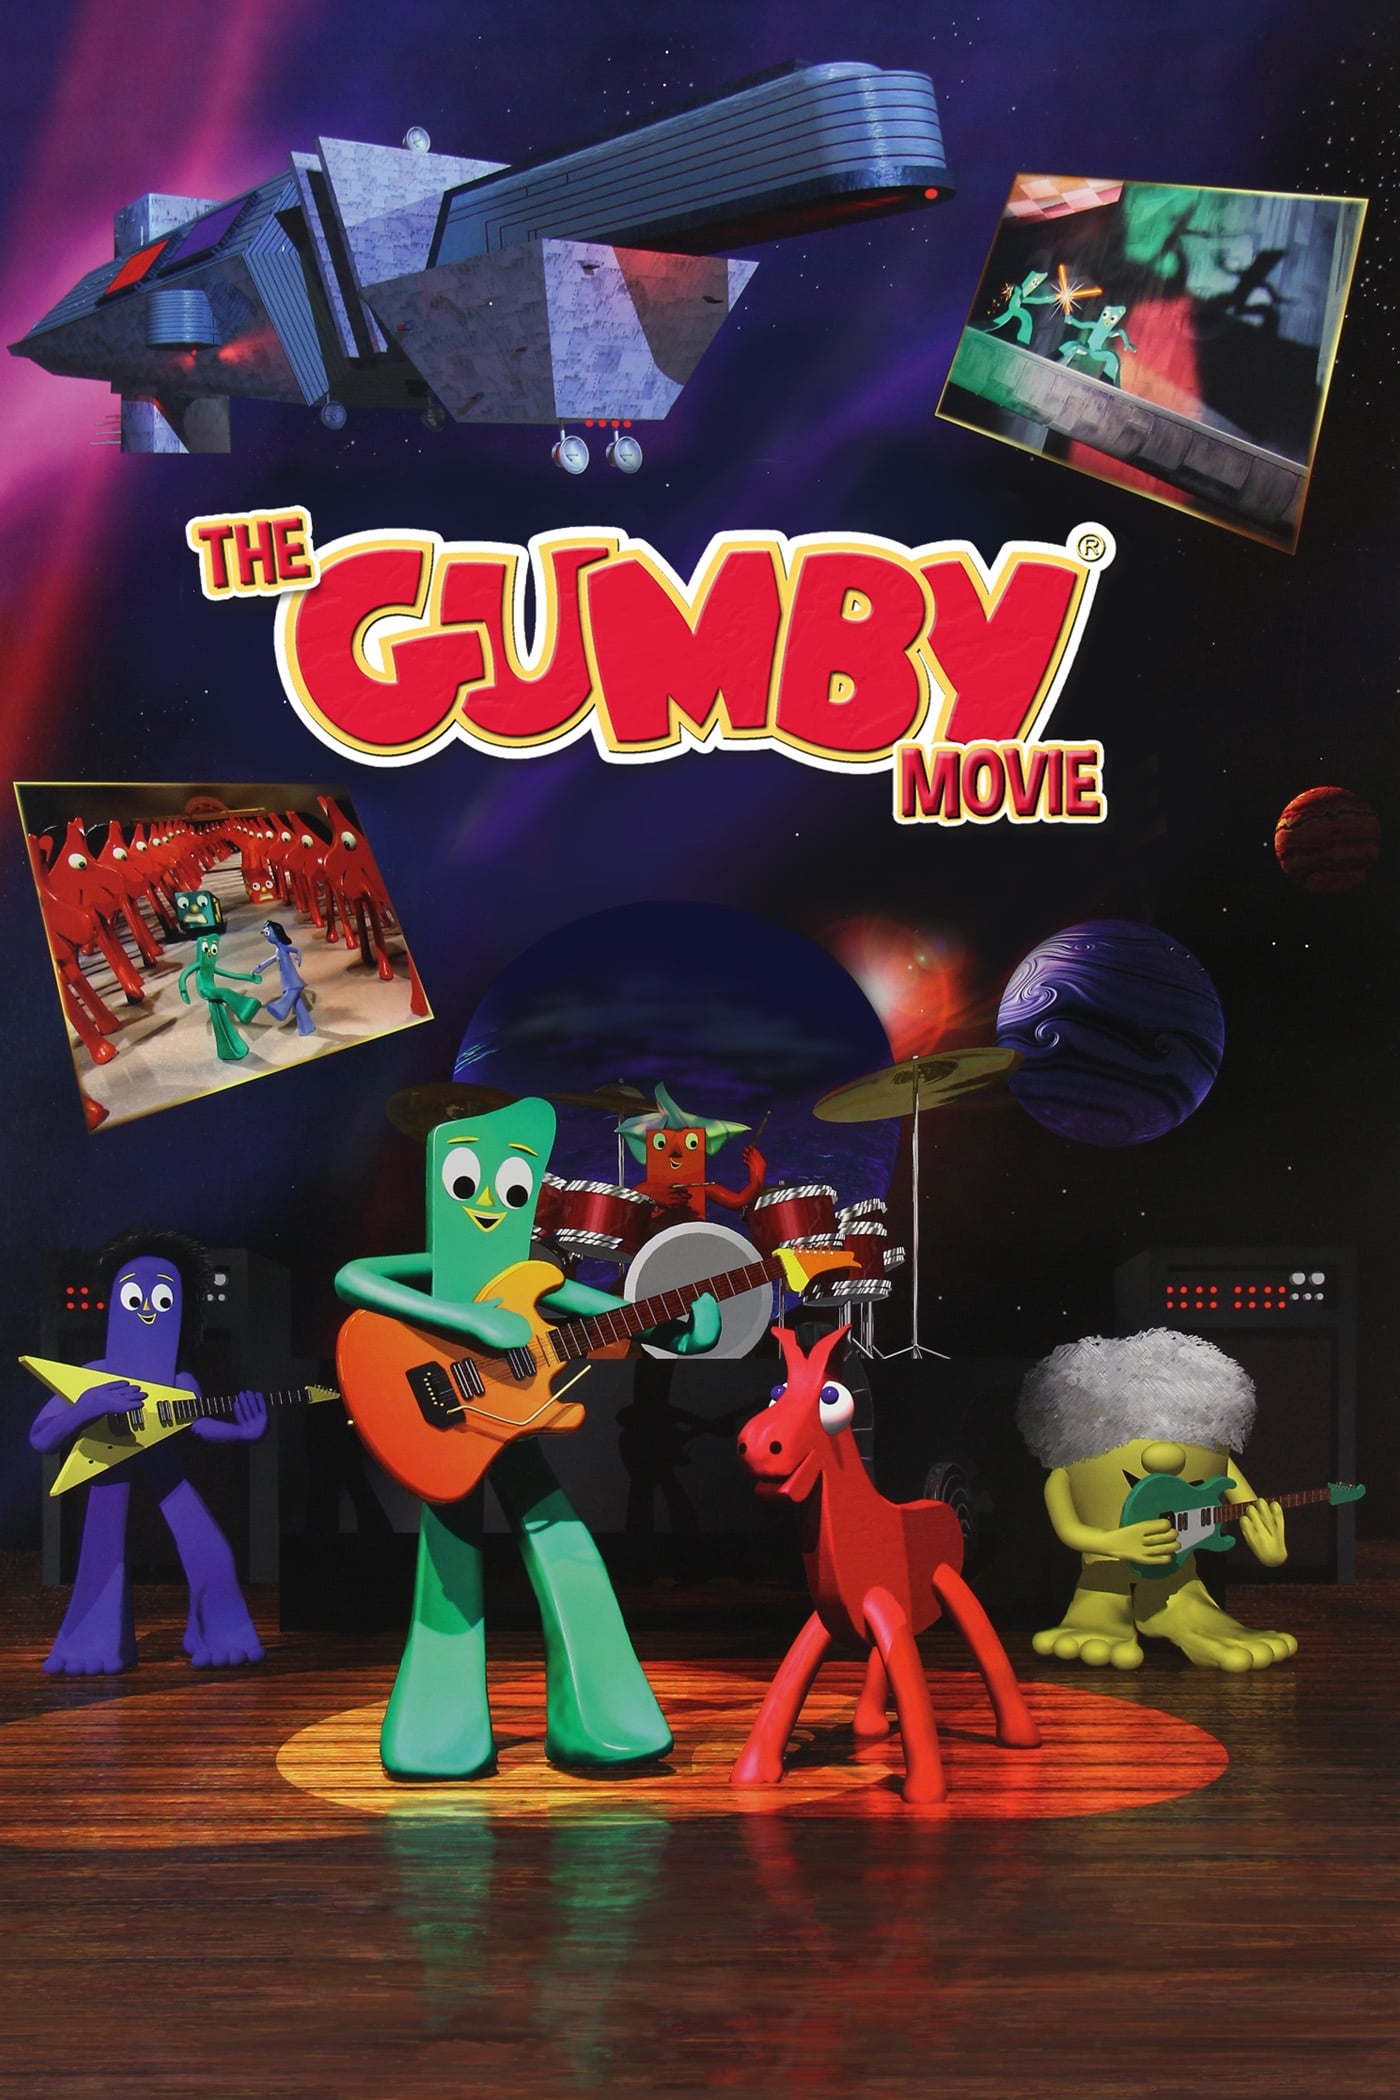 Gumby: The Movie (1995)